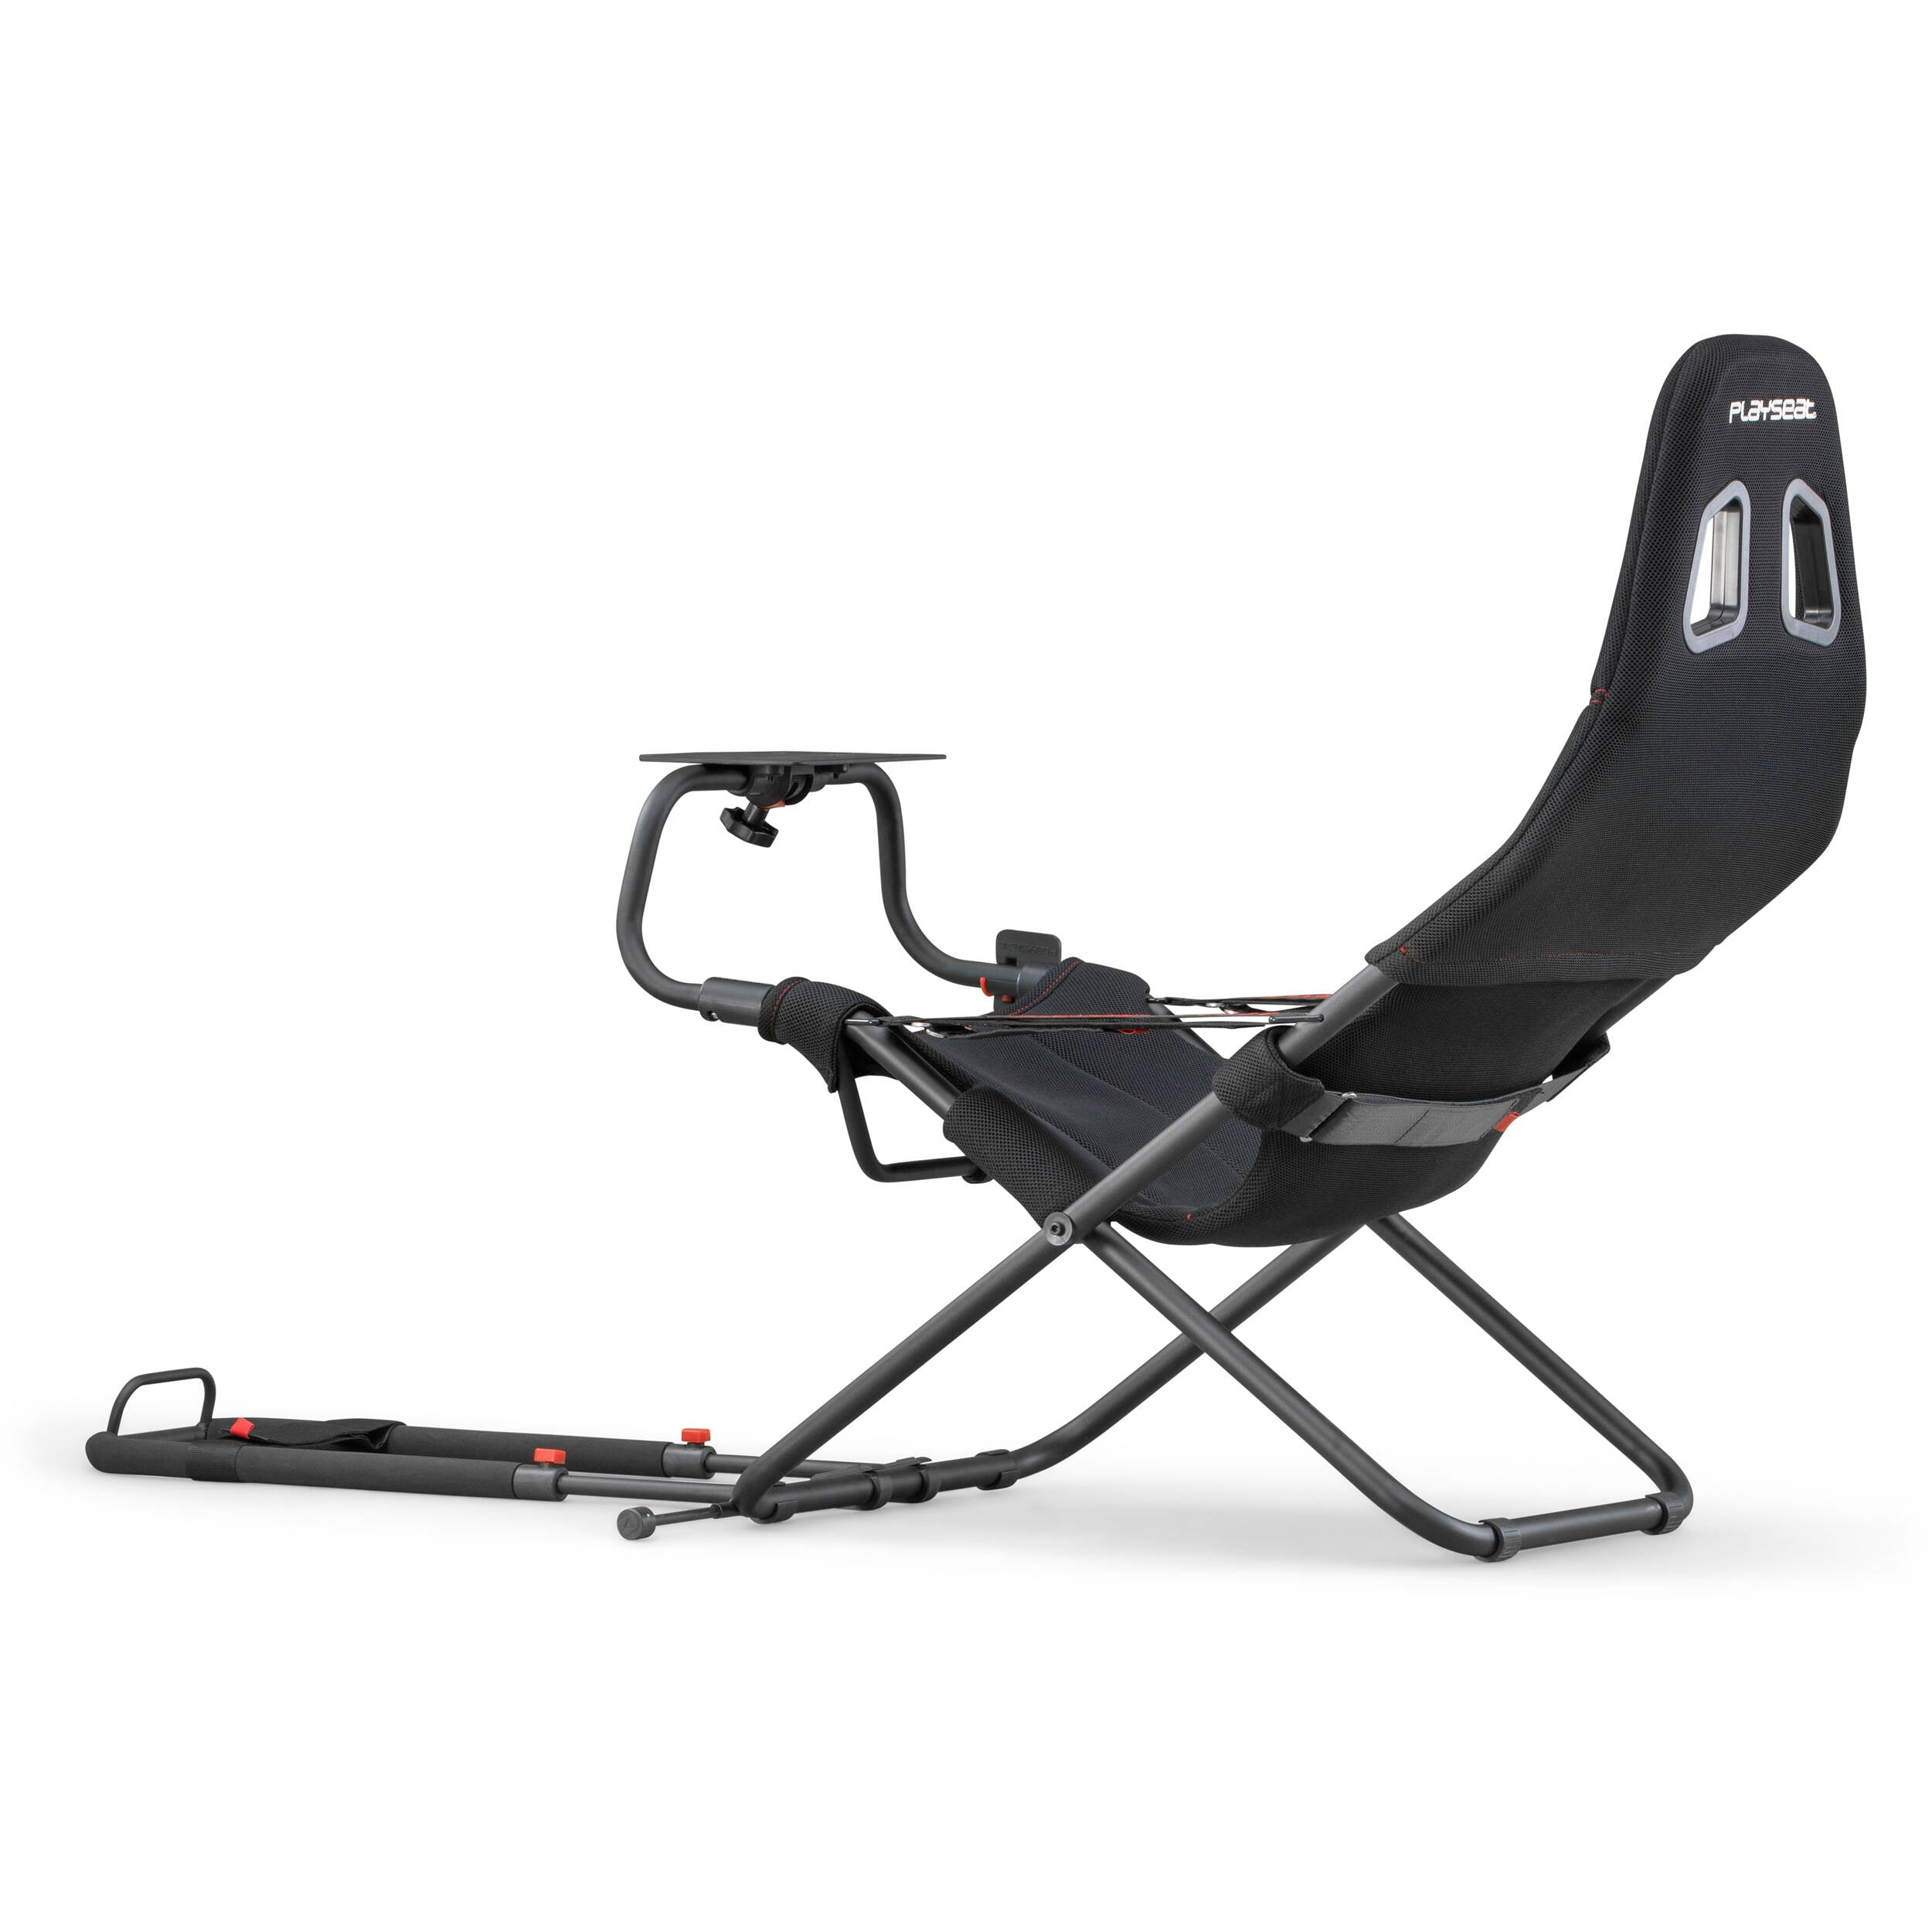 Playseat RC.00312 Challenge Sim Racing Cockpit Foldable & Adjustable for PC and Console Actifit Edition Black